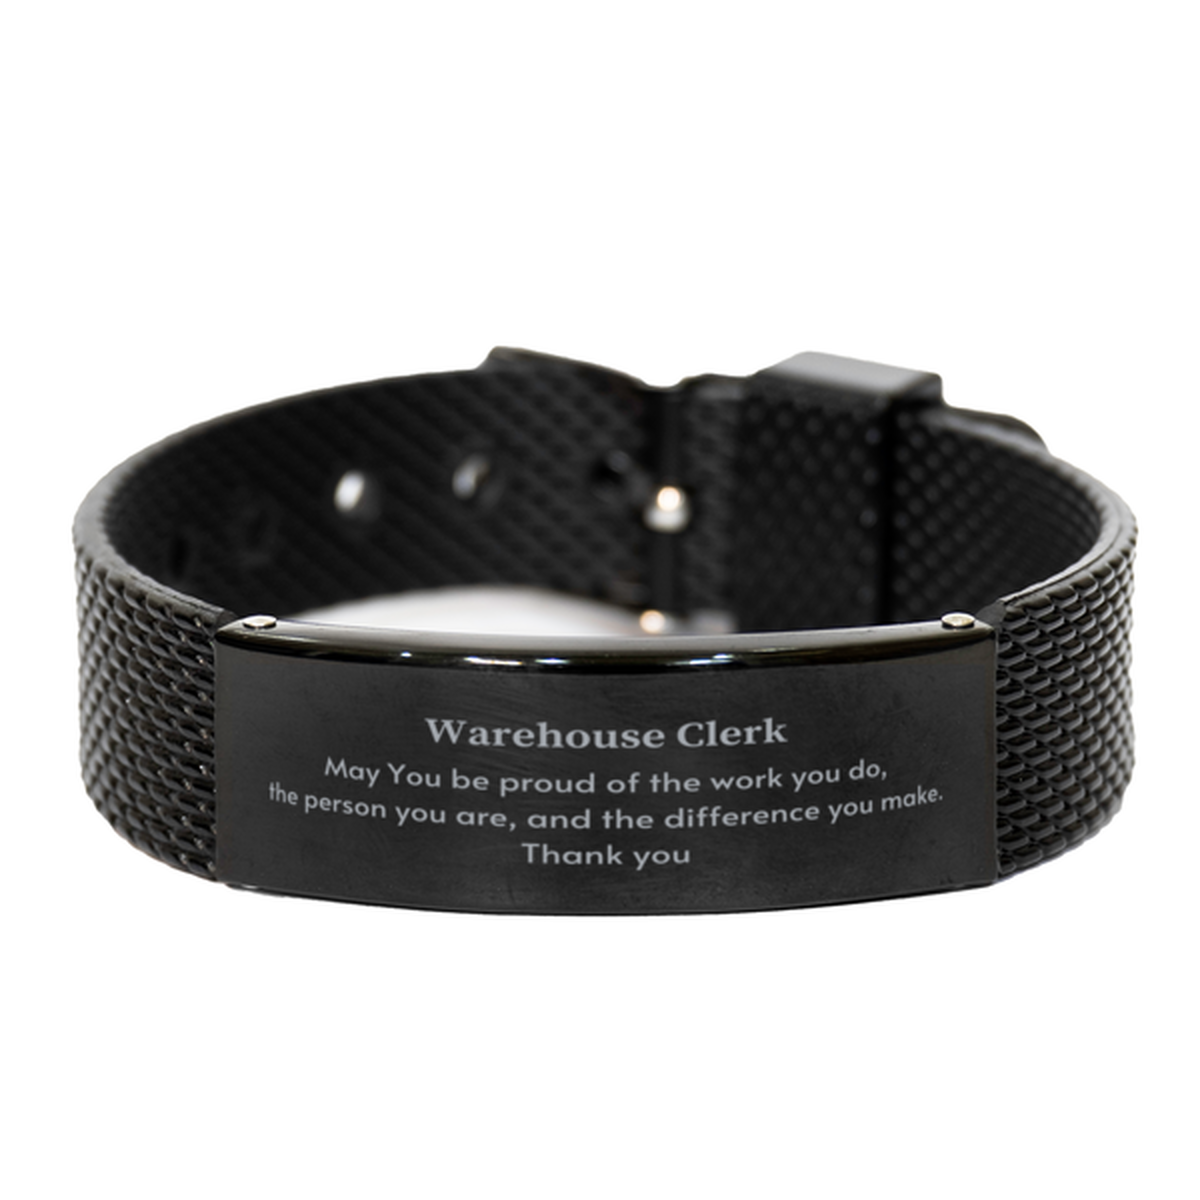 Heartwarming Black Shark Mesh Bracelet Retirement Coworkers Gifts for Warehouse Clerk, Warehouse Clerk May You be proud of the work you do, the person you are Gifts for Boss Men Women Friends